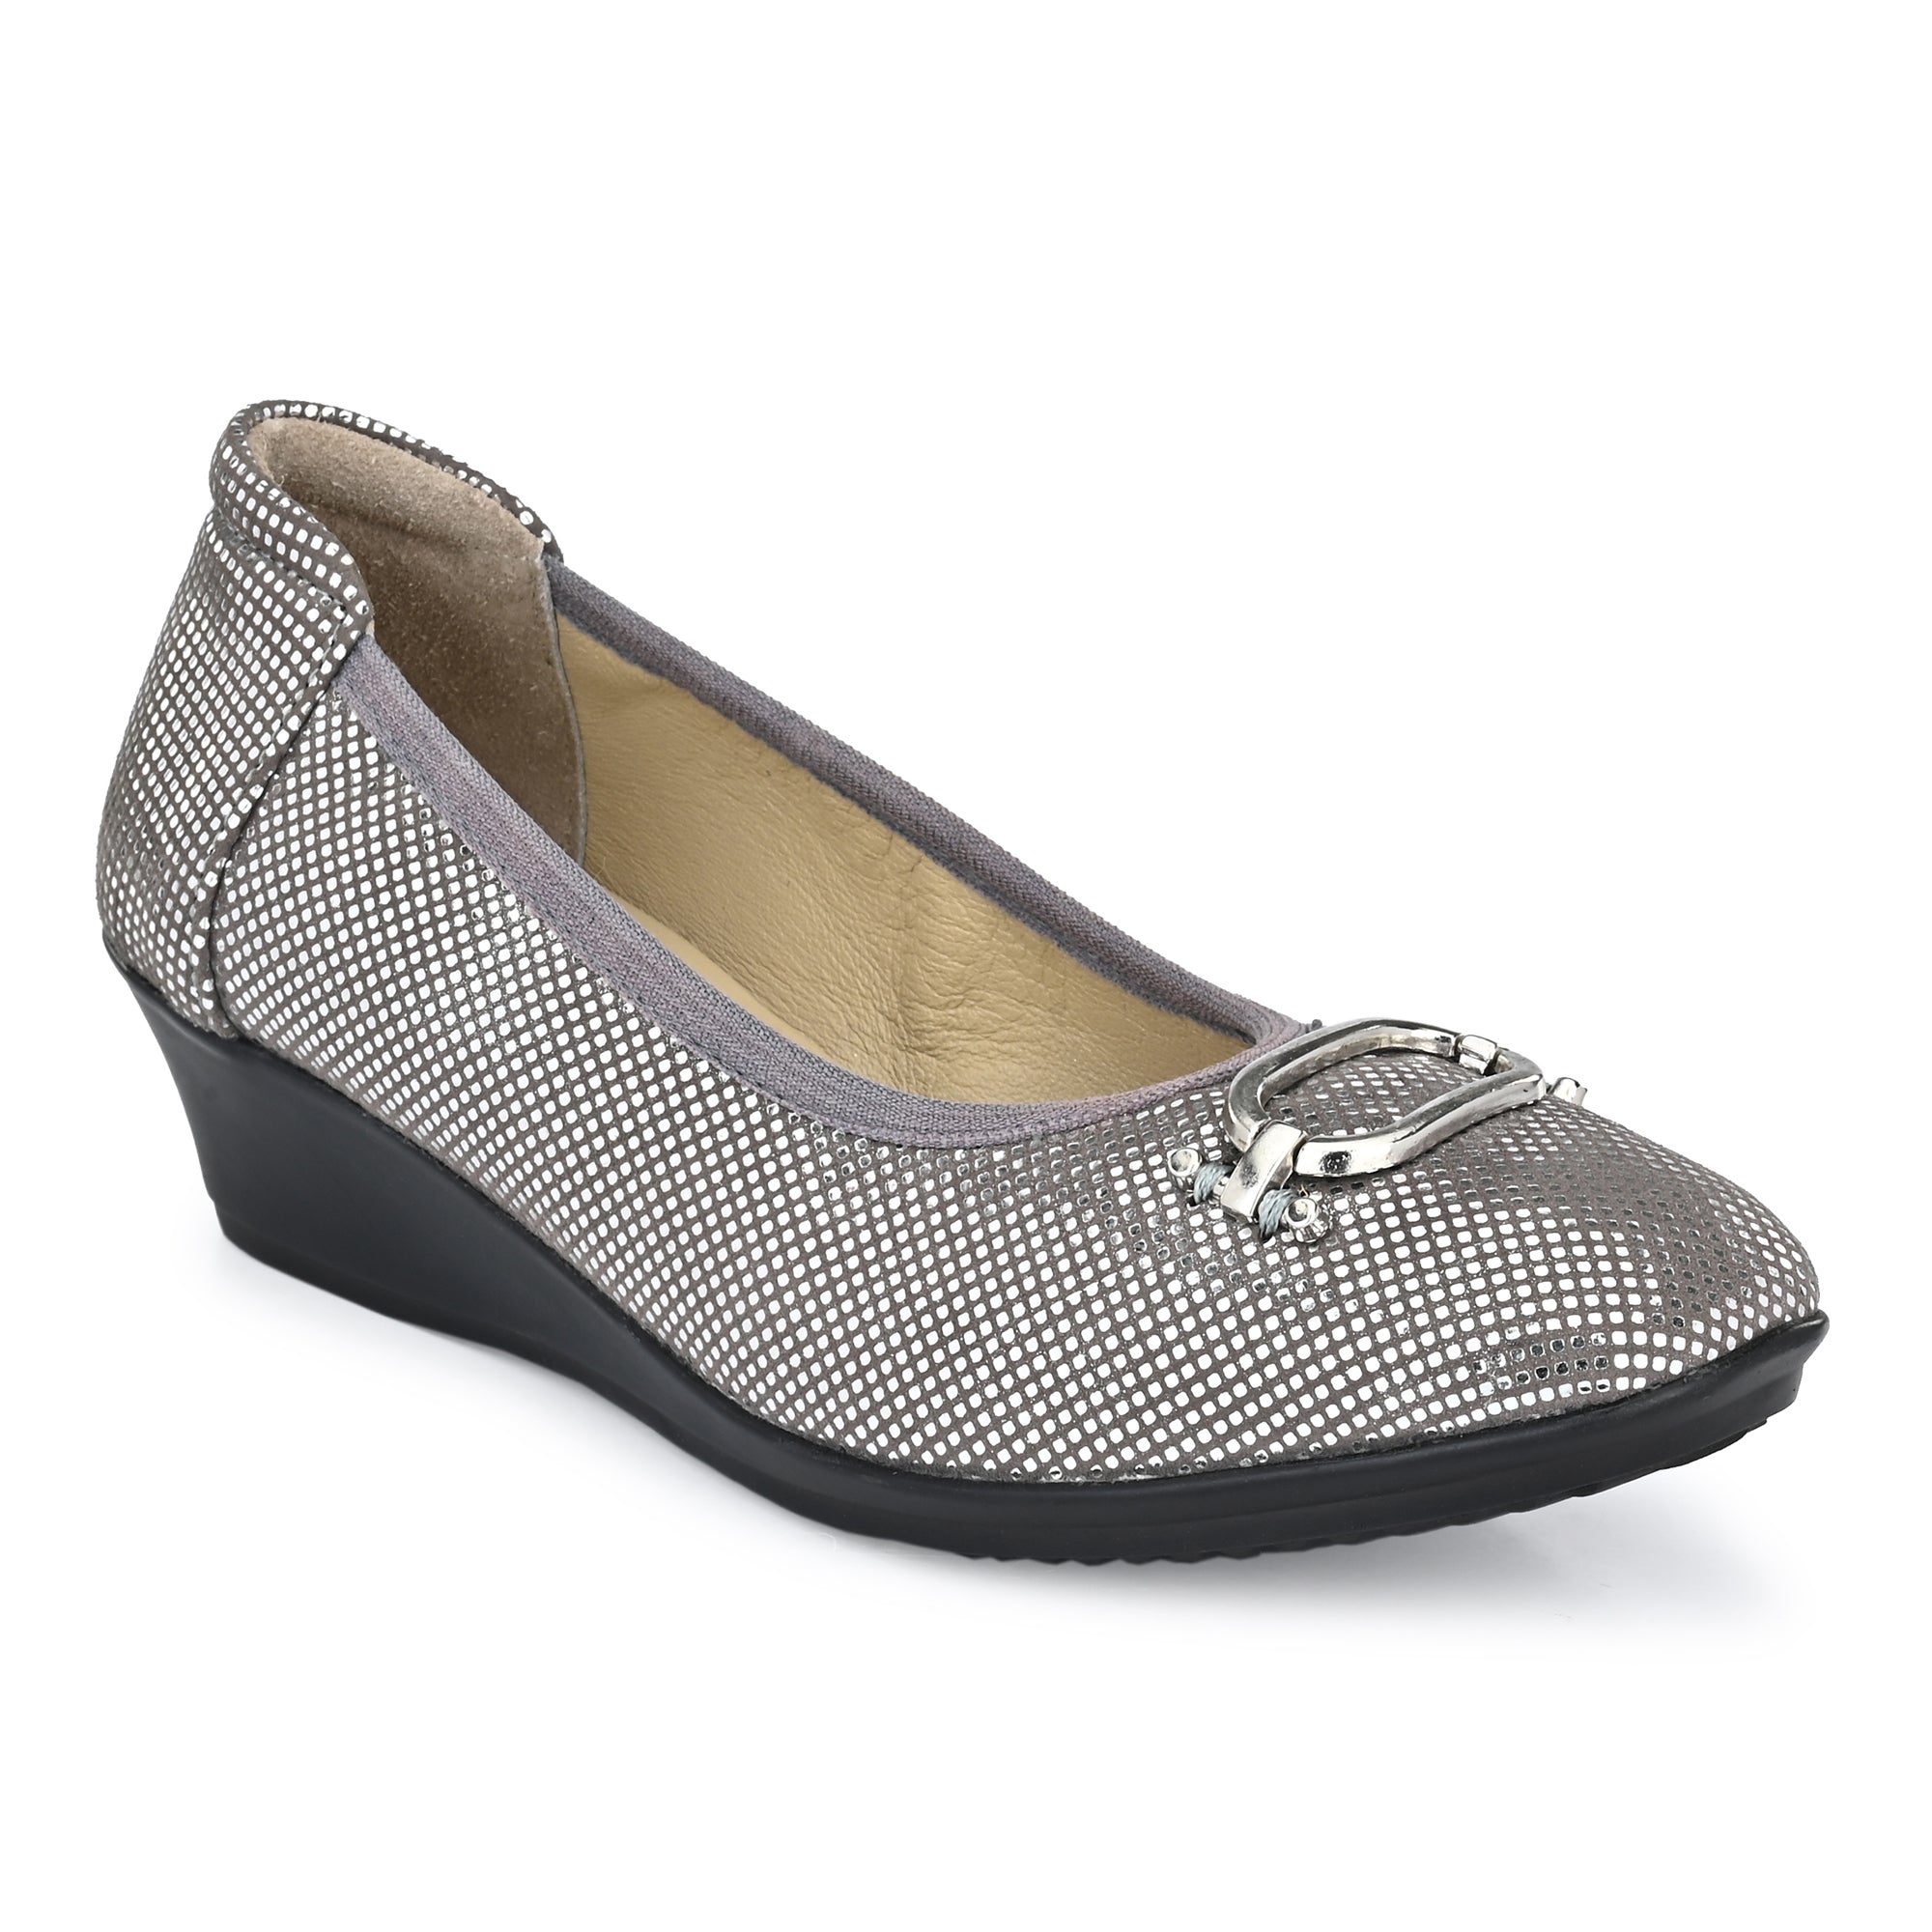 W-HR-AALIA-11 WOMEN LEATHER GREY CASUAL PARTY SLIP ON